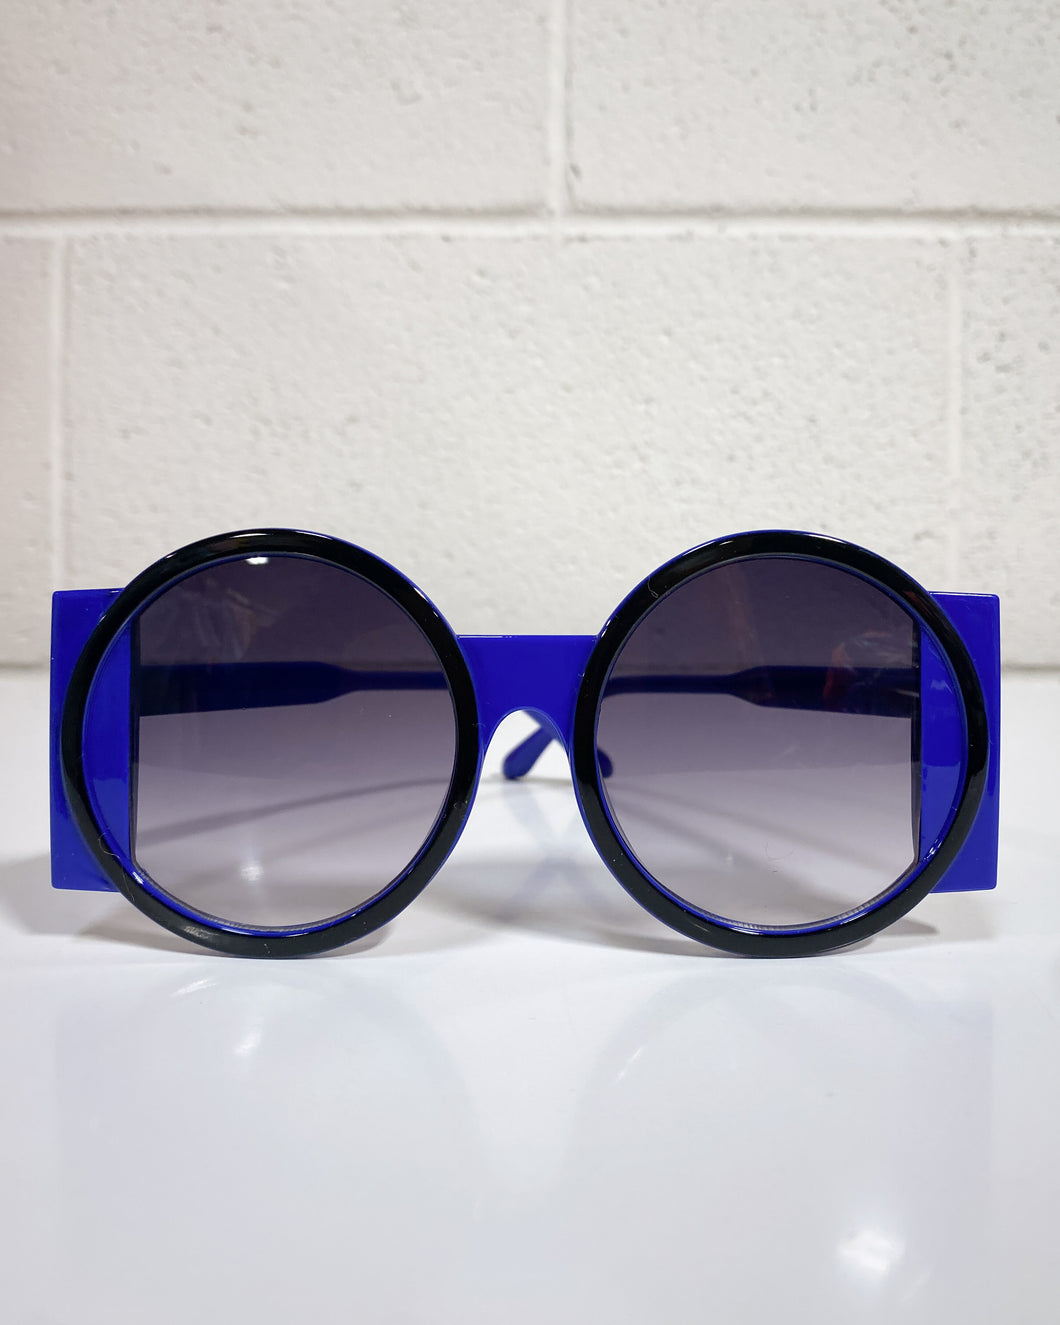 Black and Blue Sunnies